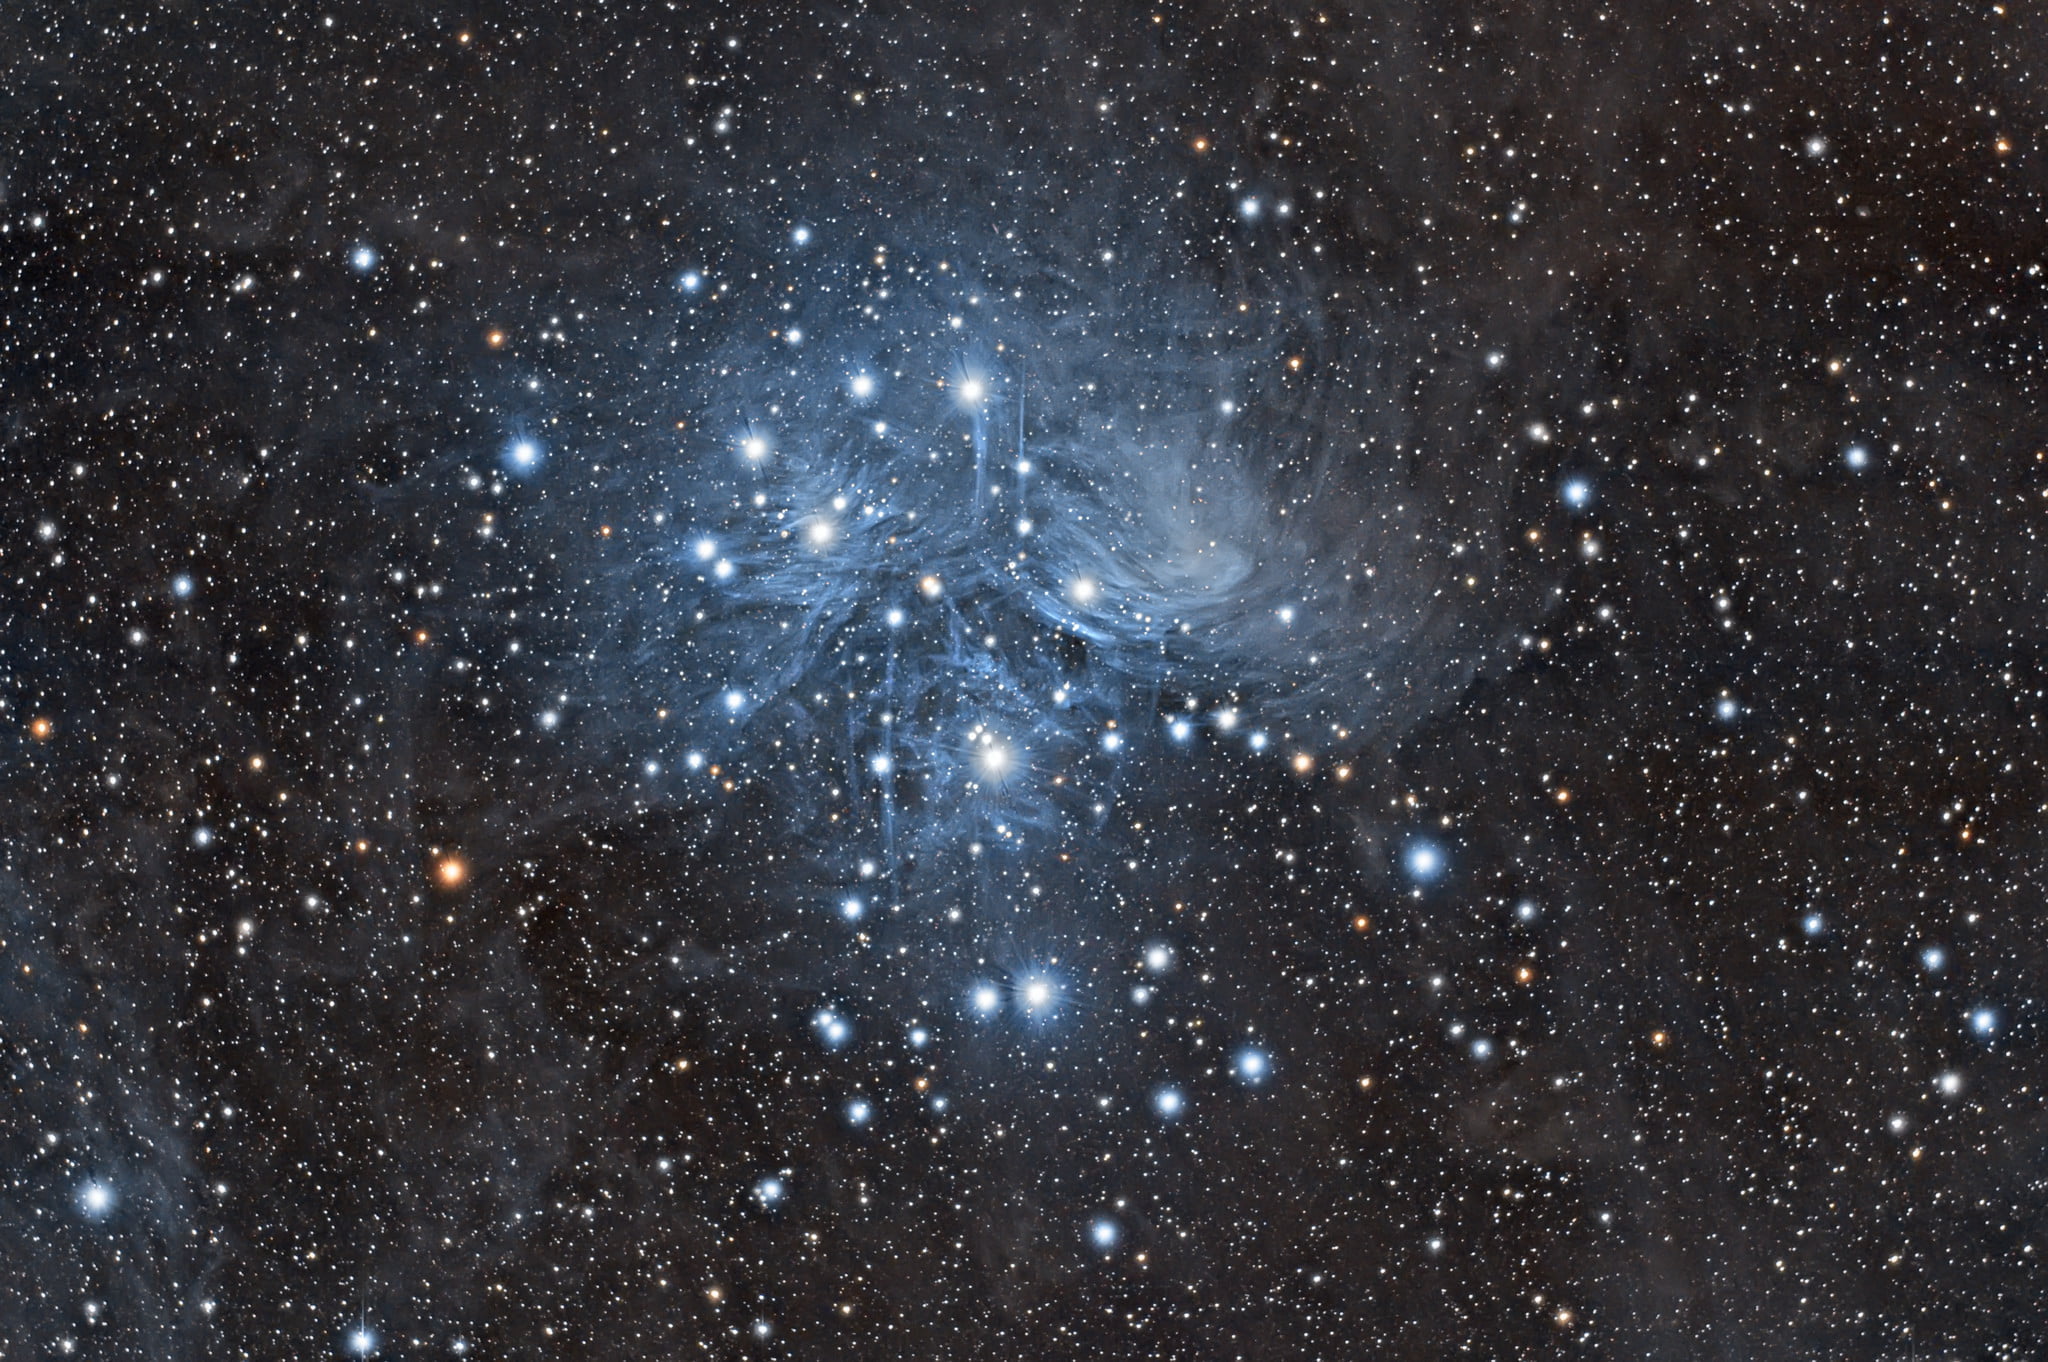 space, The Pleiades, M45, star cluster, in the constellation of Taurus